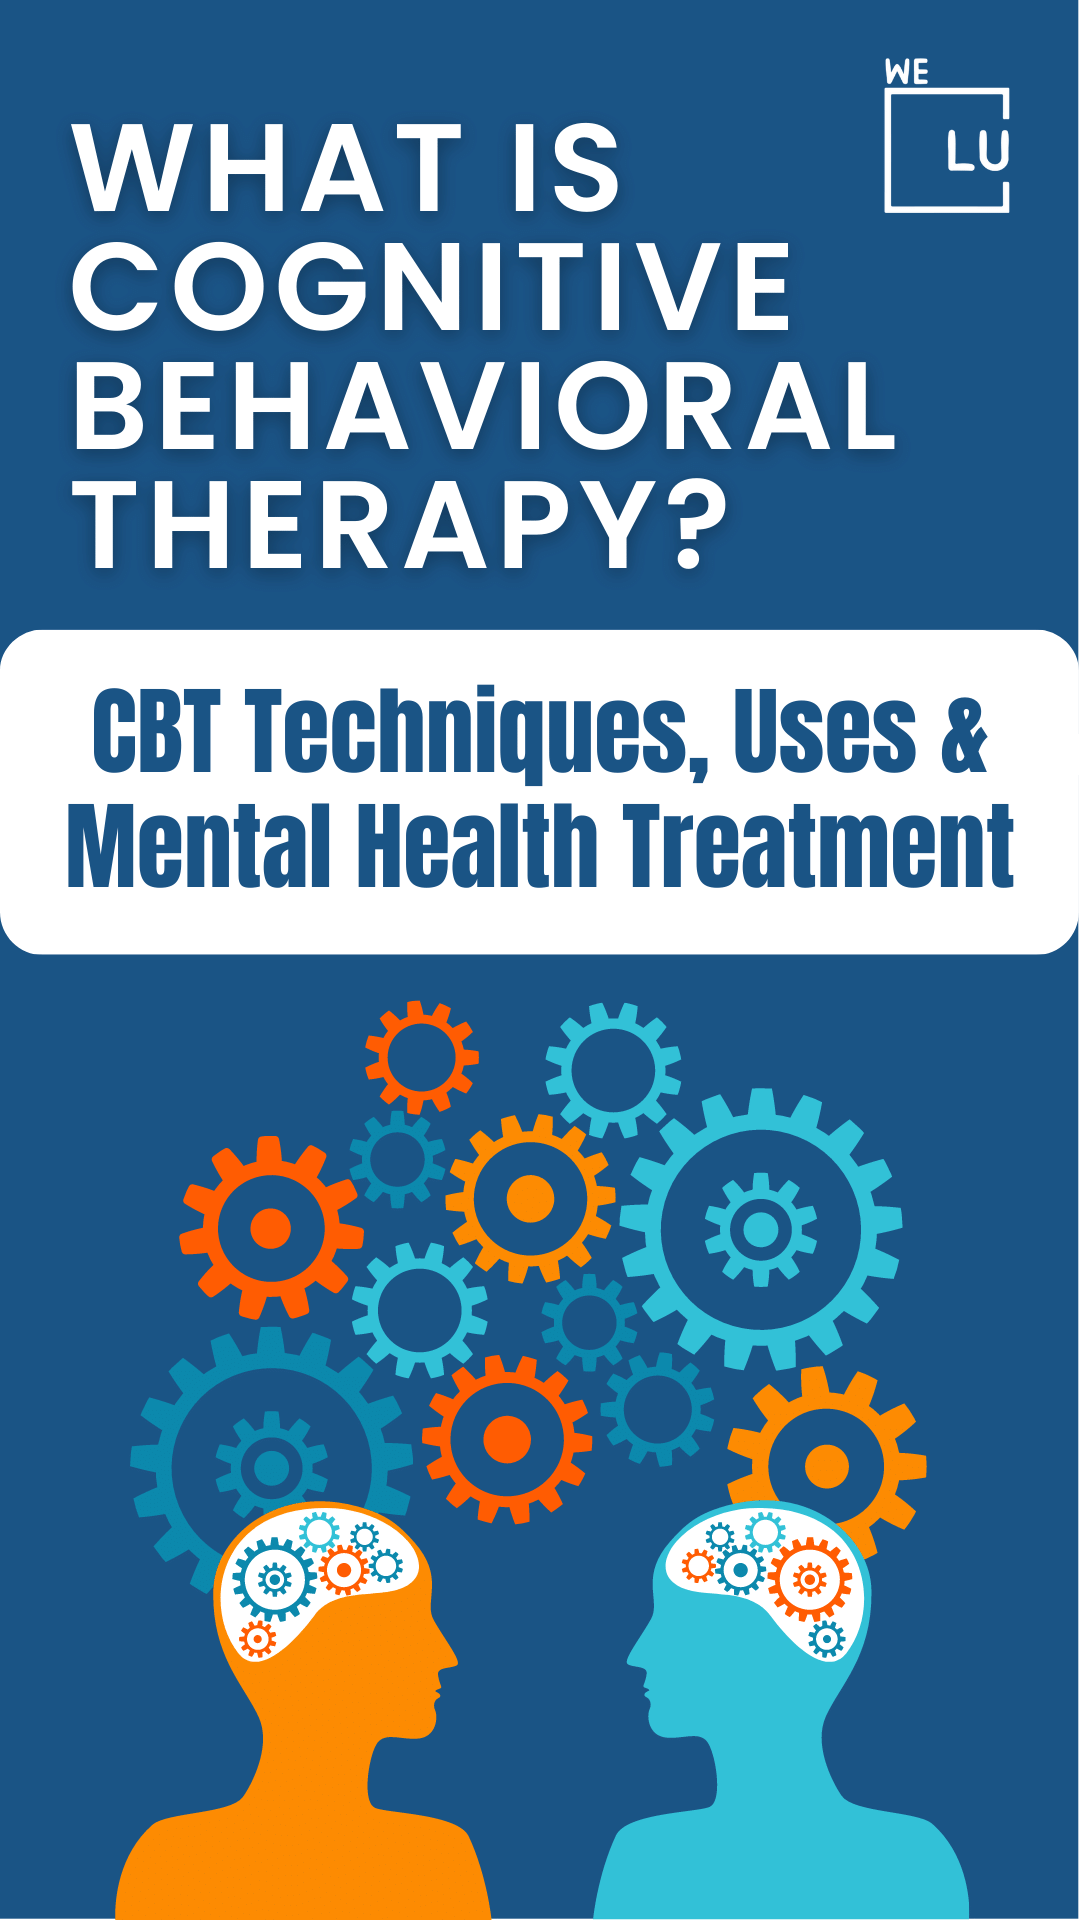 Cognitive behavioral therapy works by identifying, tackling, and changing unhelpful thinking so that your mindset, behaviors, and overall mental health and well-being improve with practice. Continue to read more about cognitive behavioral therapy.